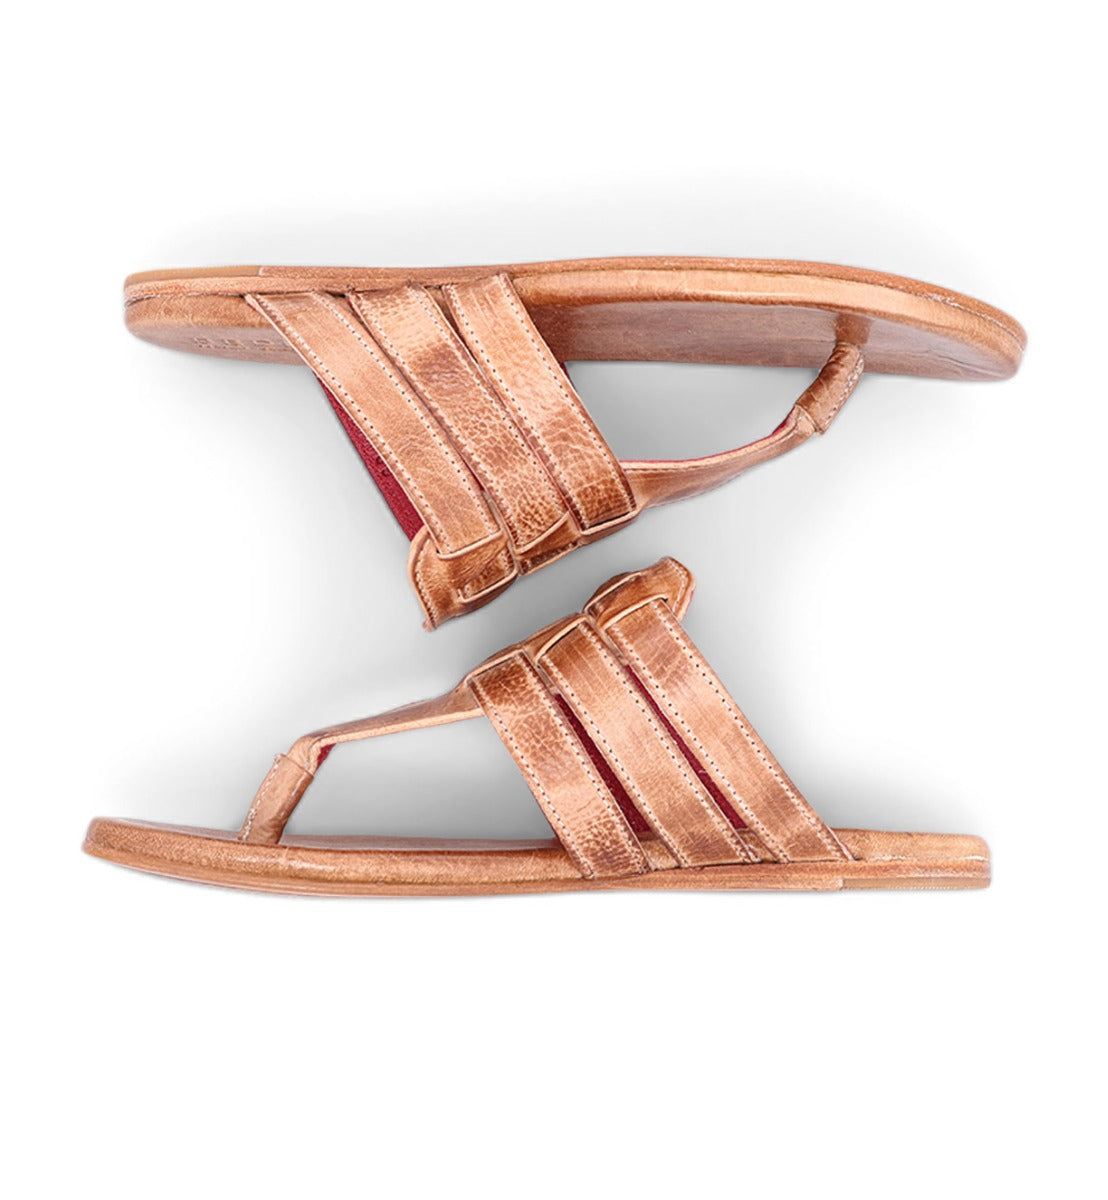 A pair of Yoli tan leather sandals by Bed Stu.